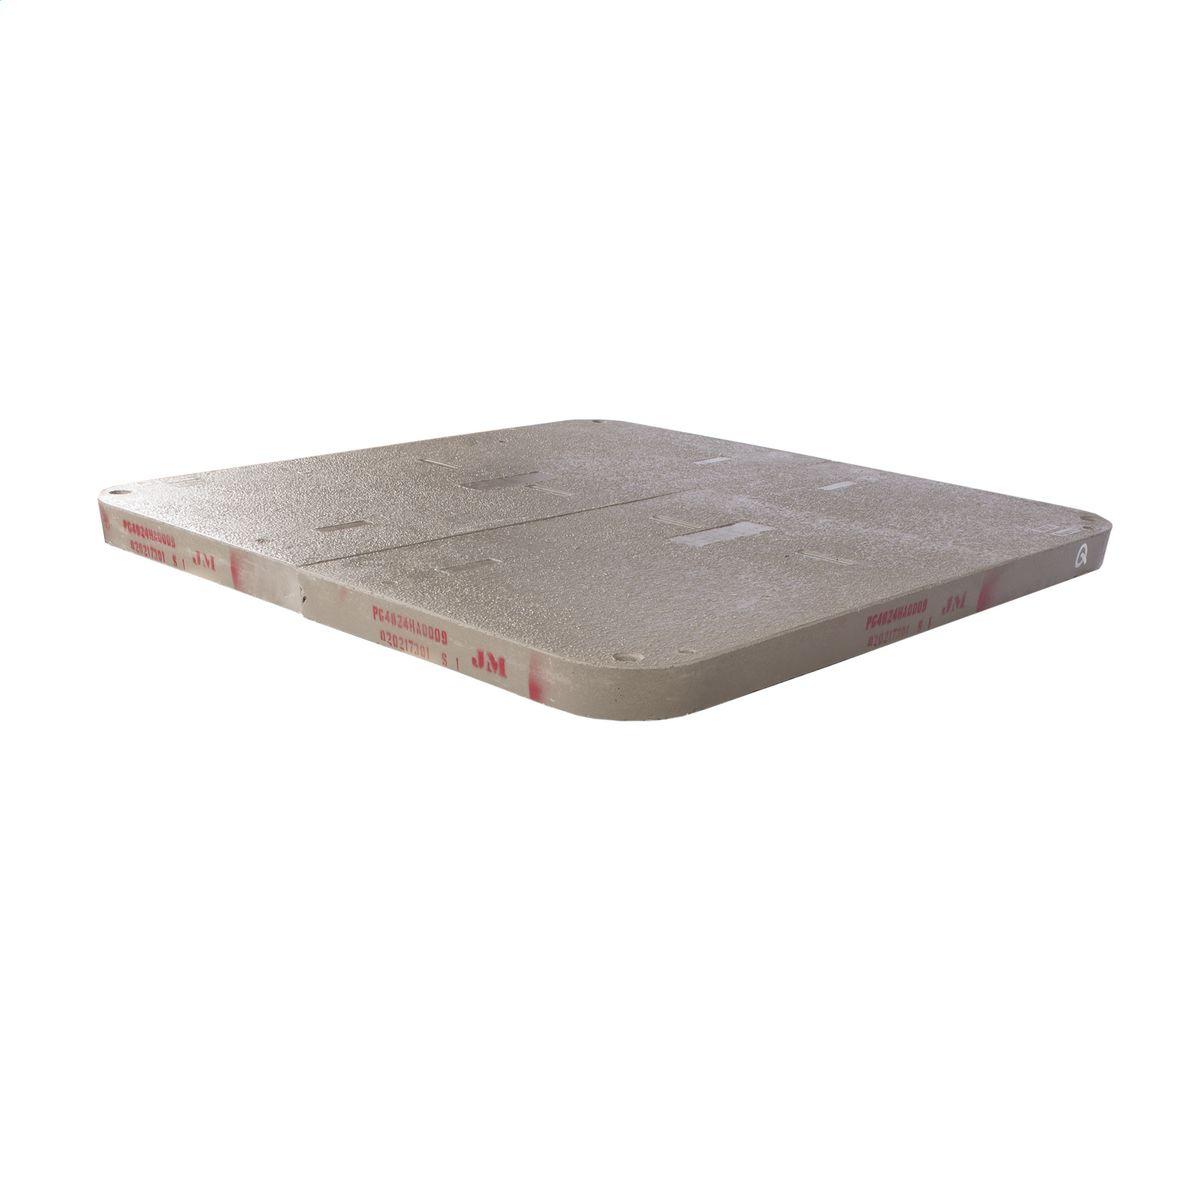 Hubbell PG3636HH0009 Cover, Polymer Concrete, Extra Heavy Duty Tier 22, 36"x36"x3", 2-piece w/ 2 Bolts, Blank Logo 